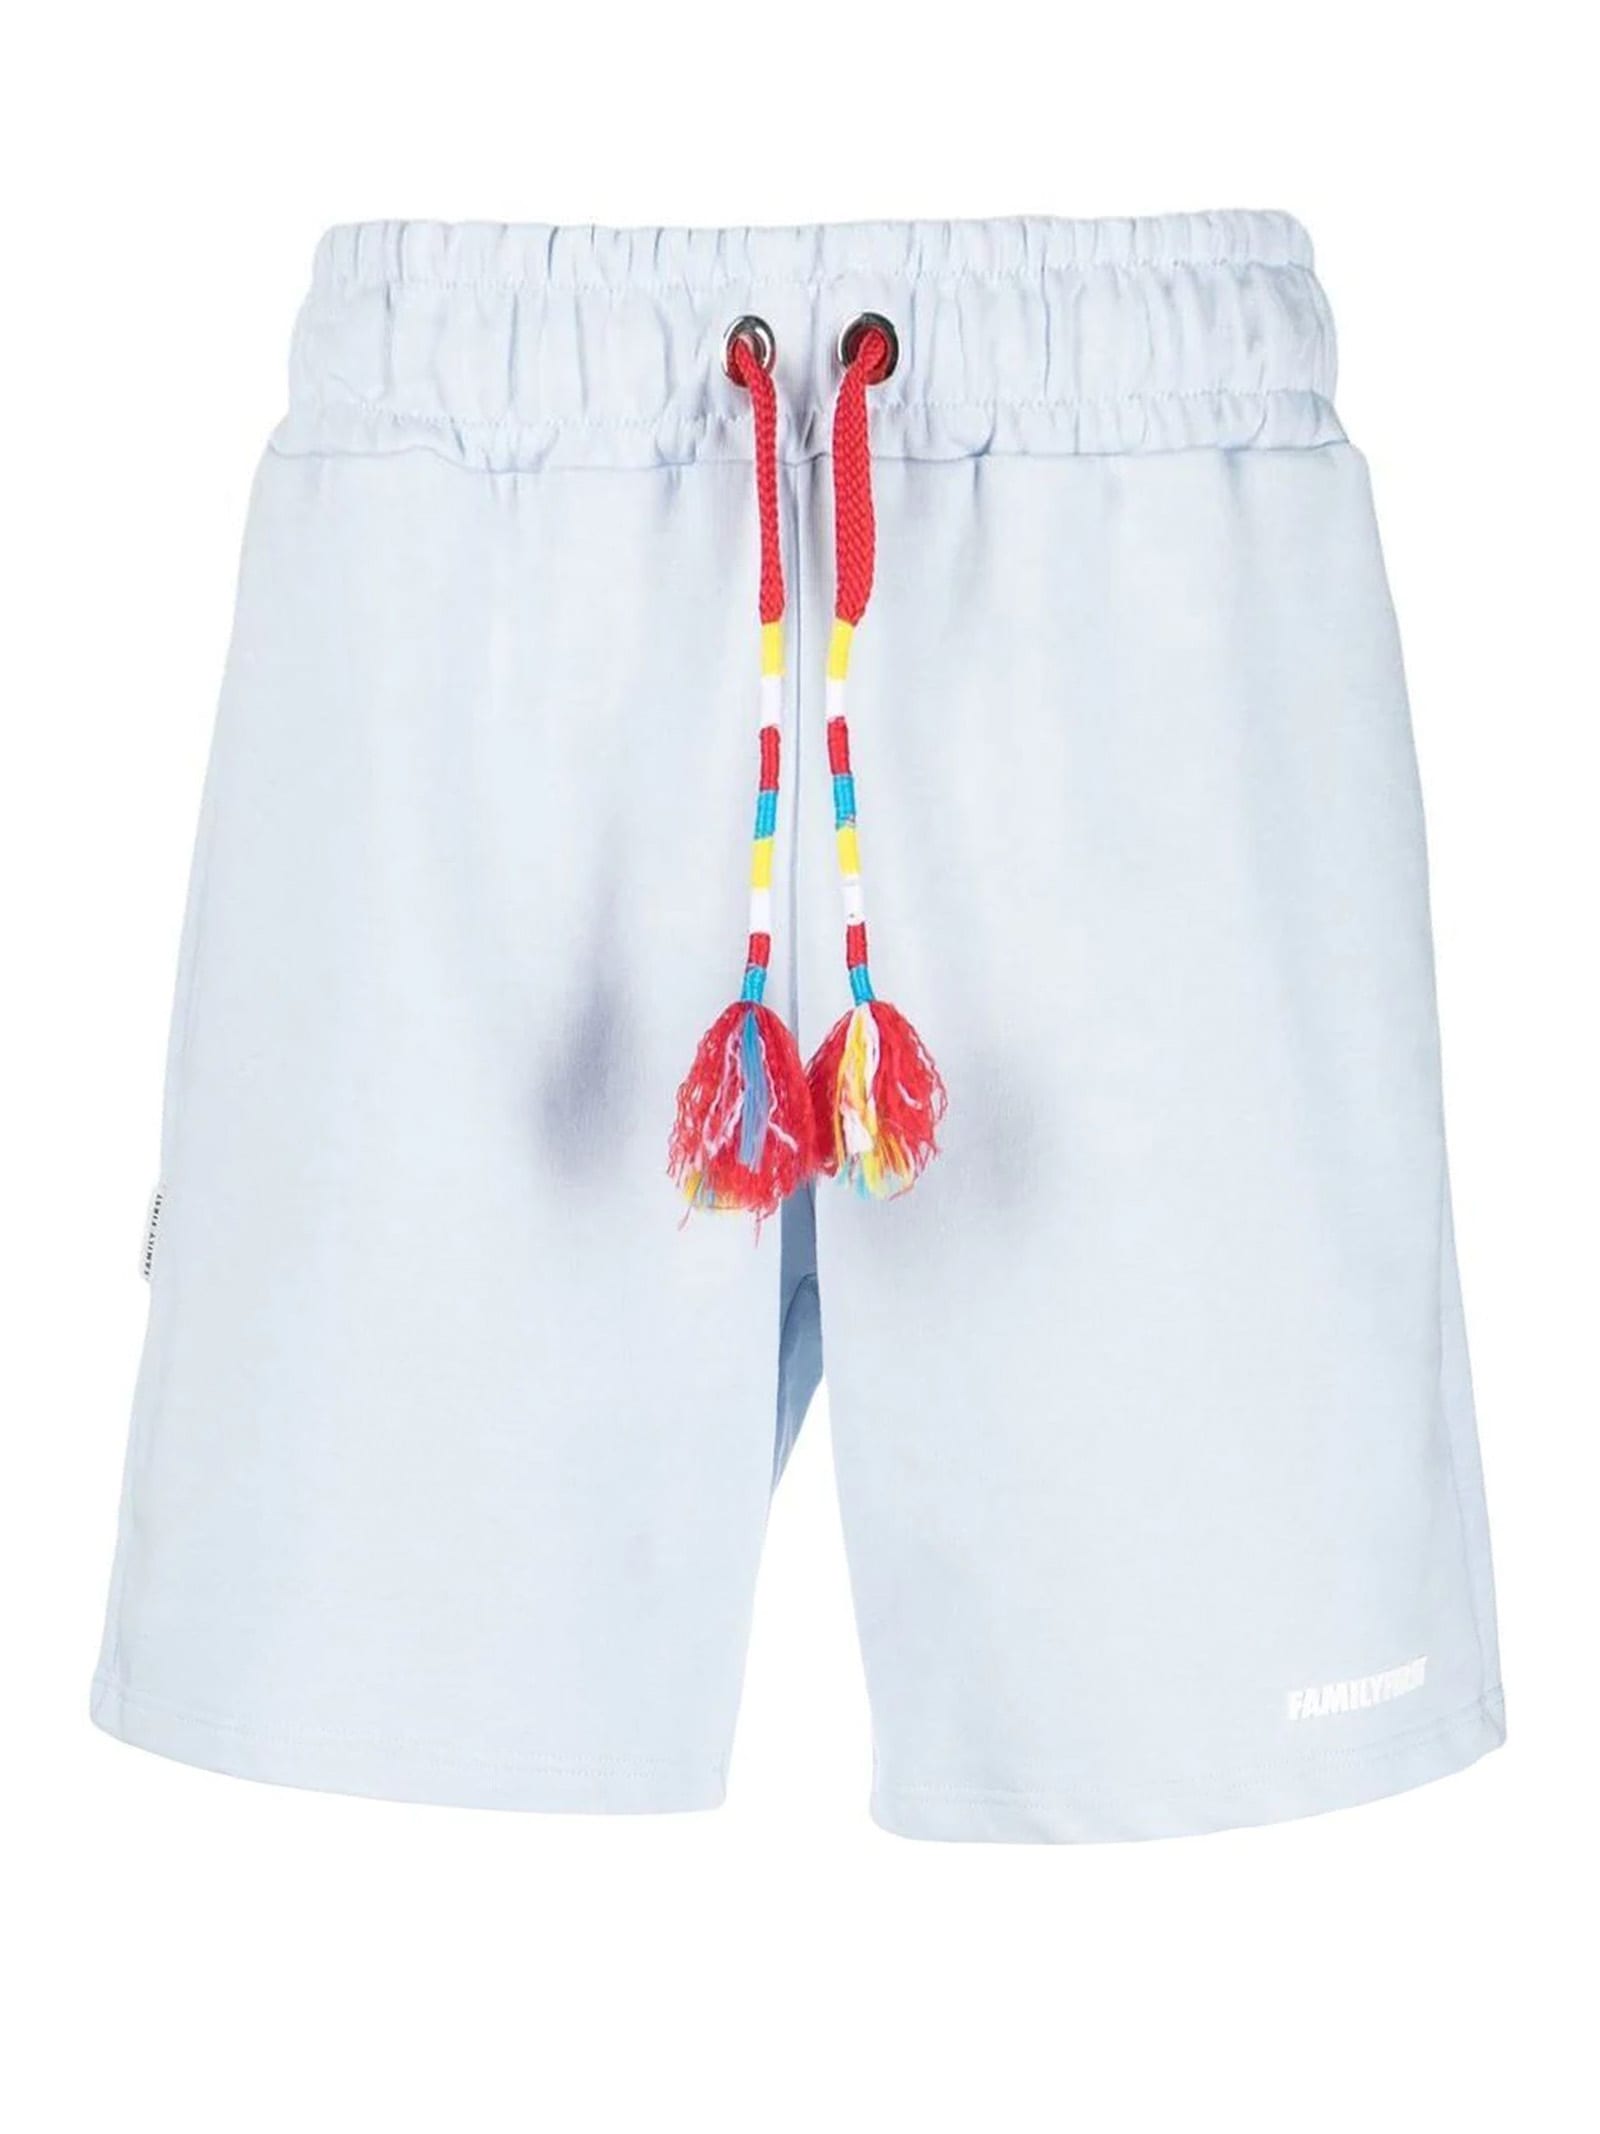 Family First Milano Light Blue Cotton Shorts